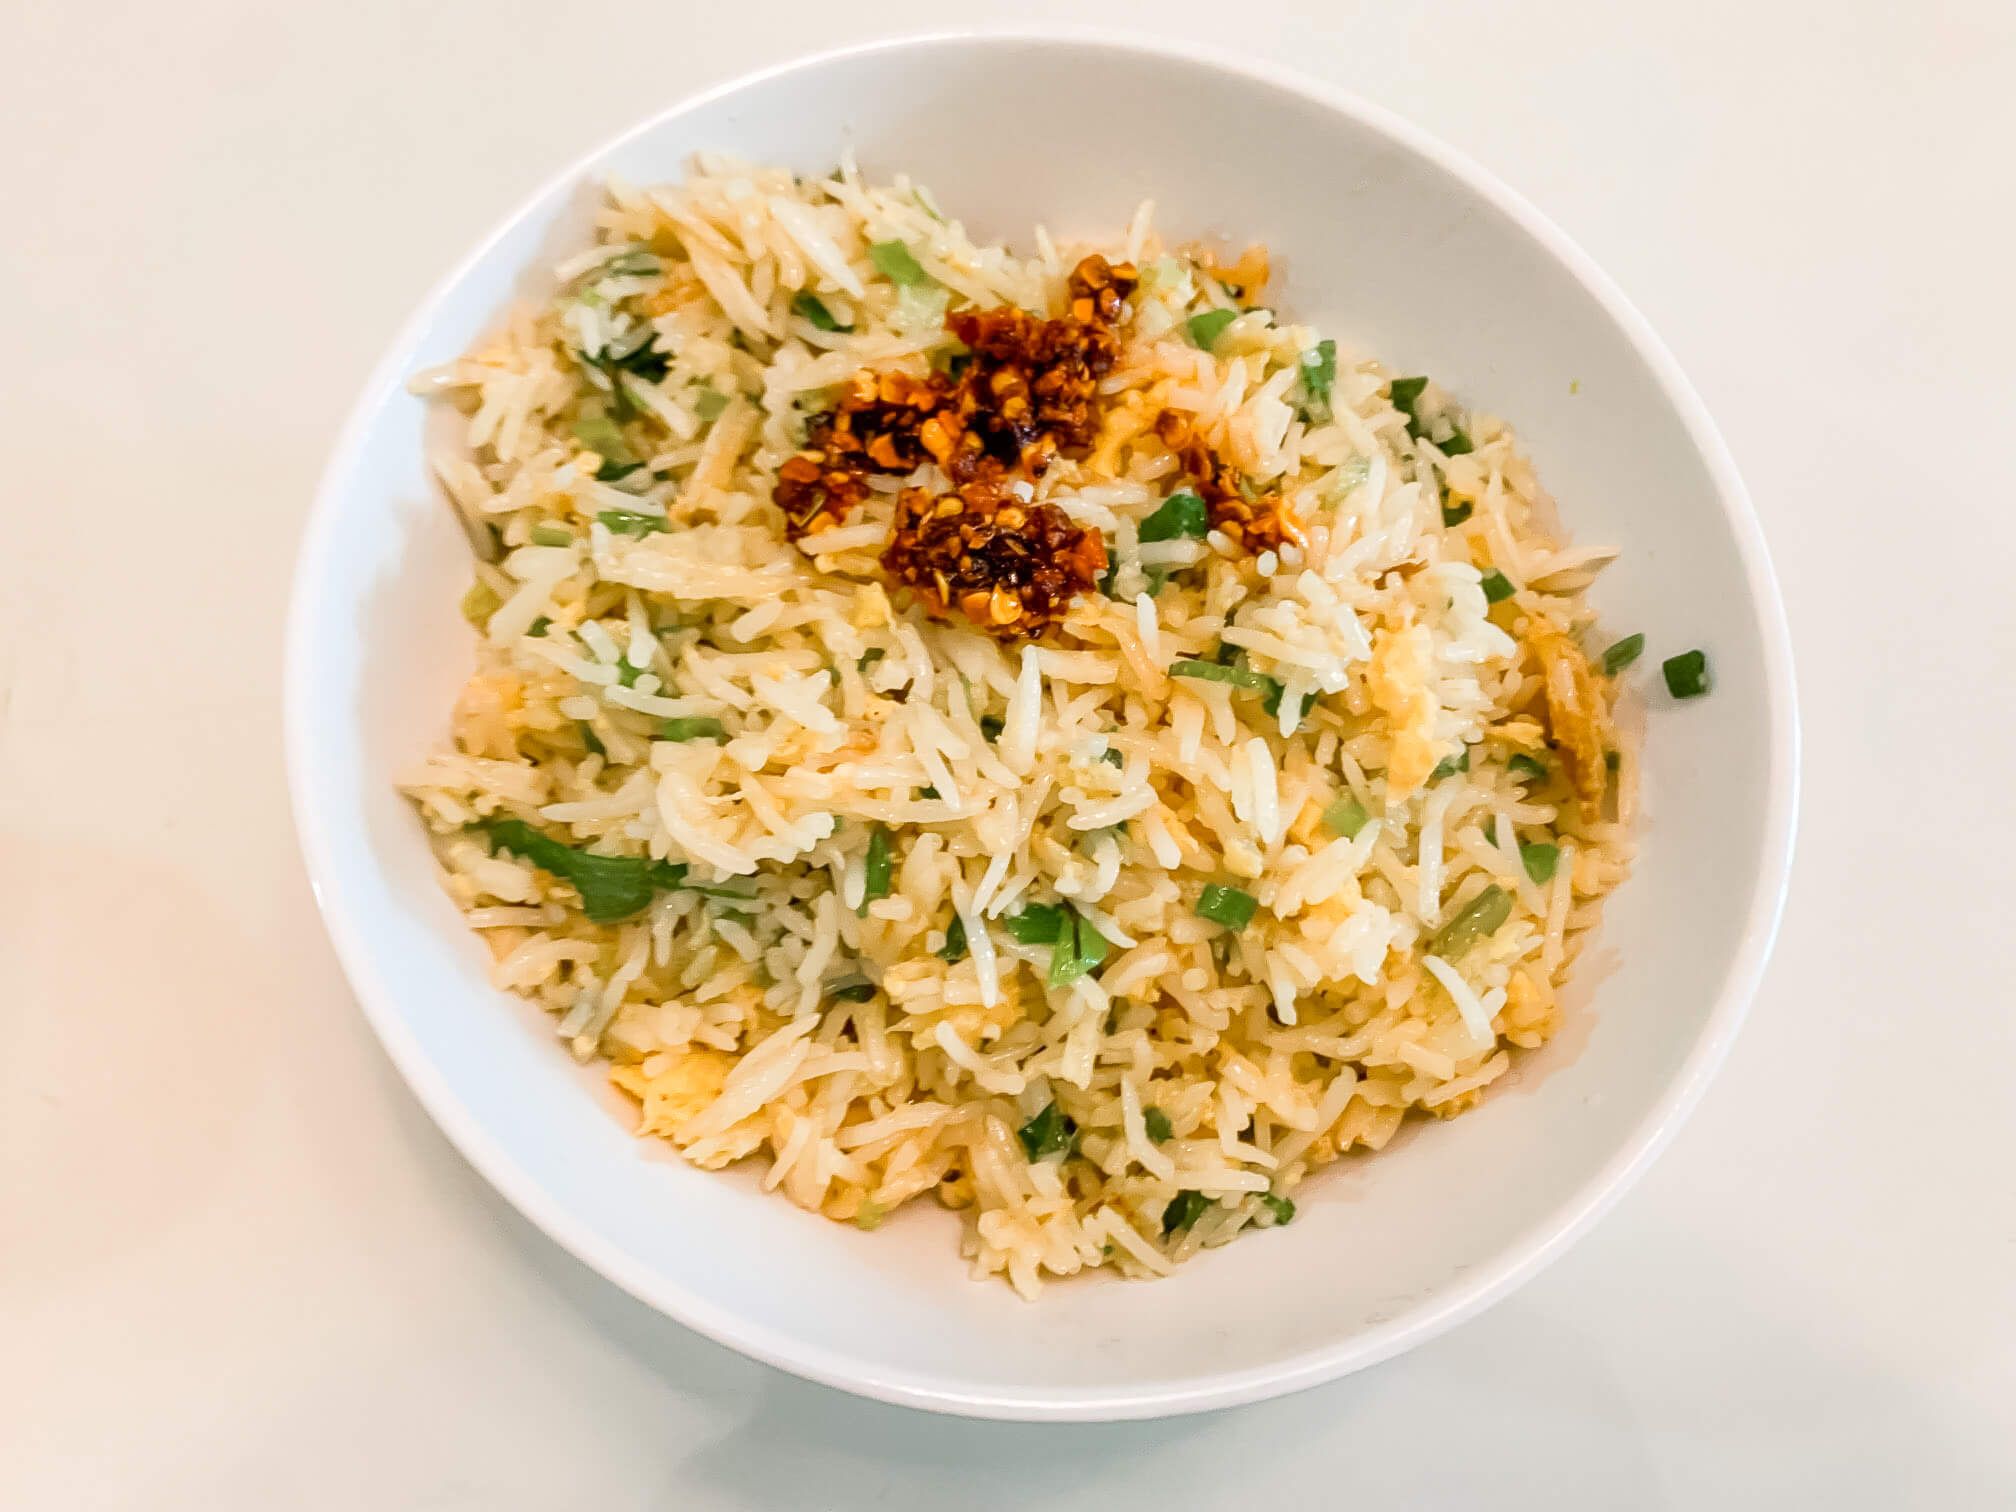 A large bowl of egg fried rice.